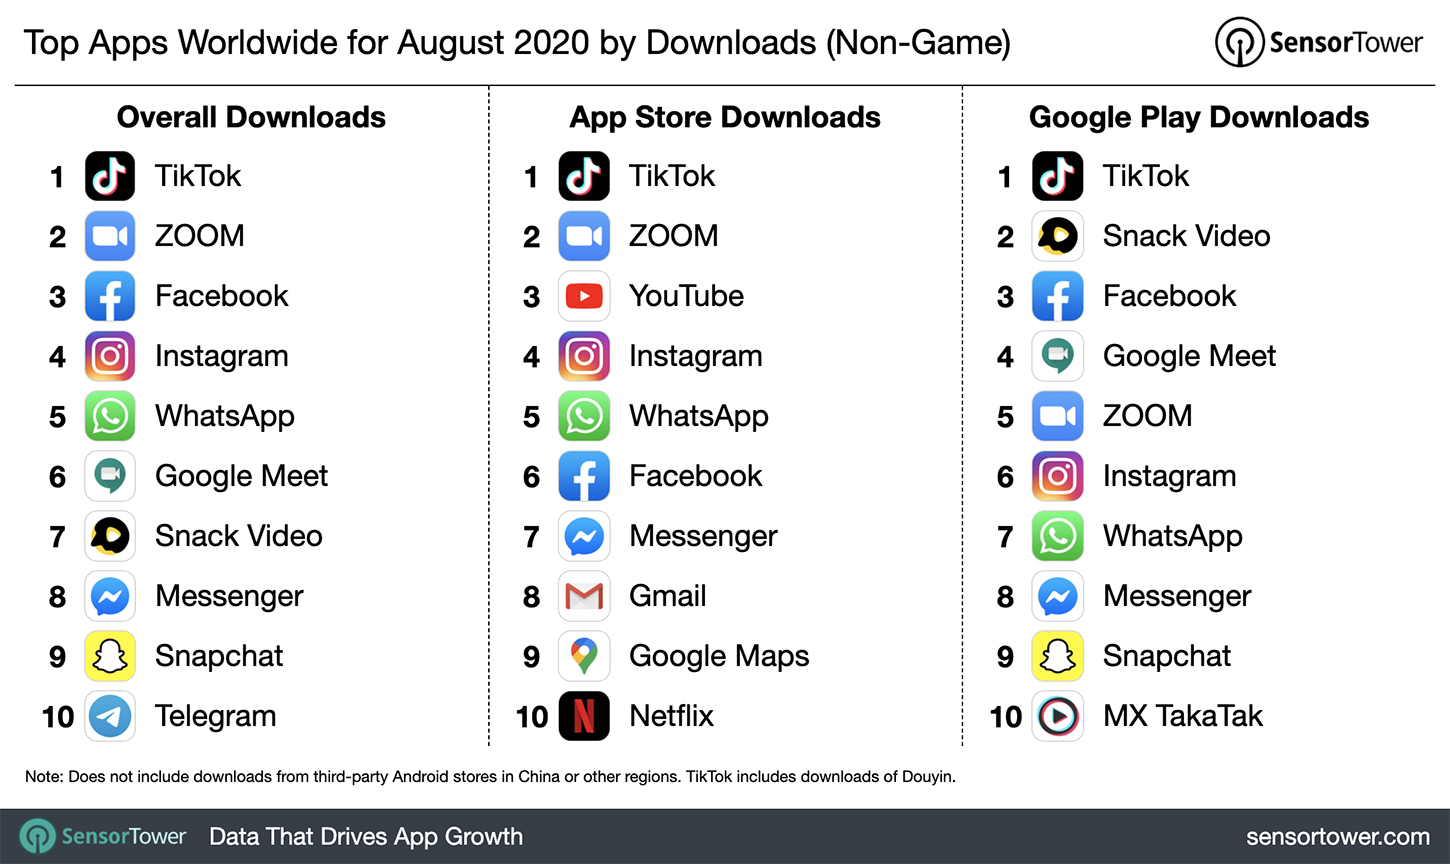 Top Apps Worldwide for August 2020 by Downloads